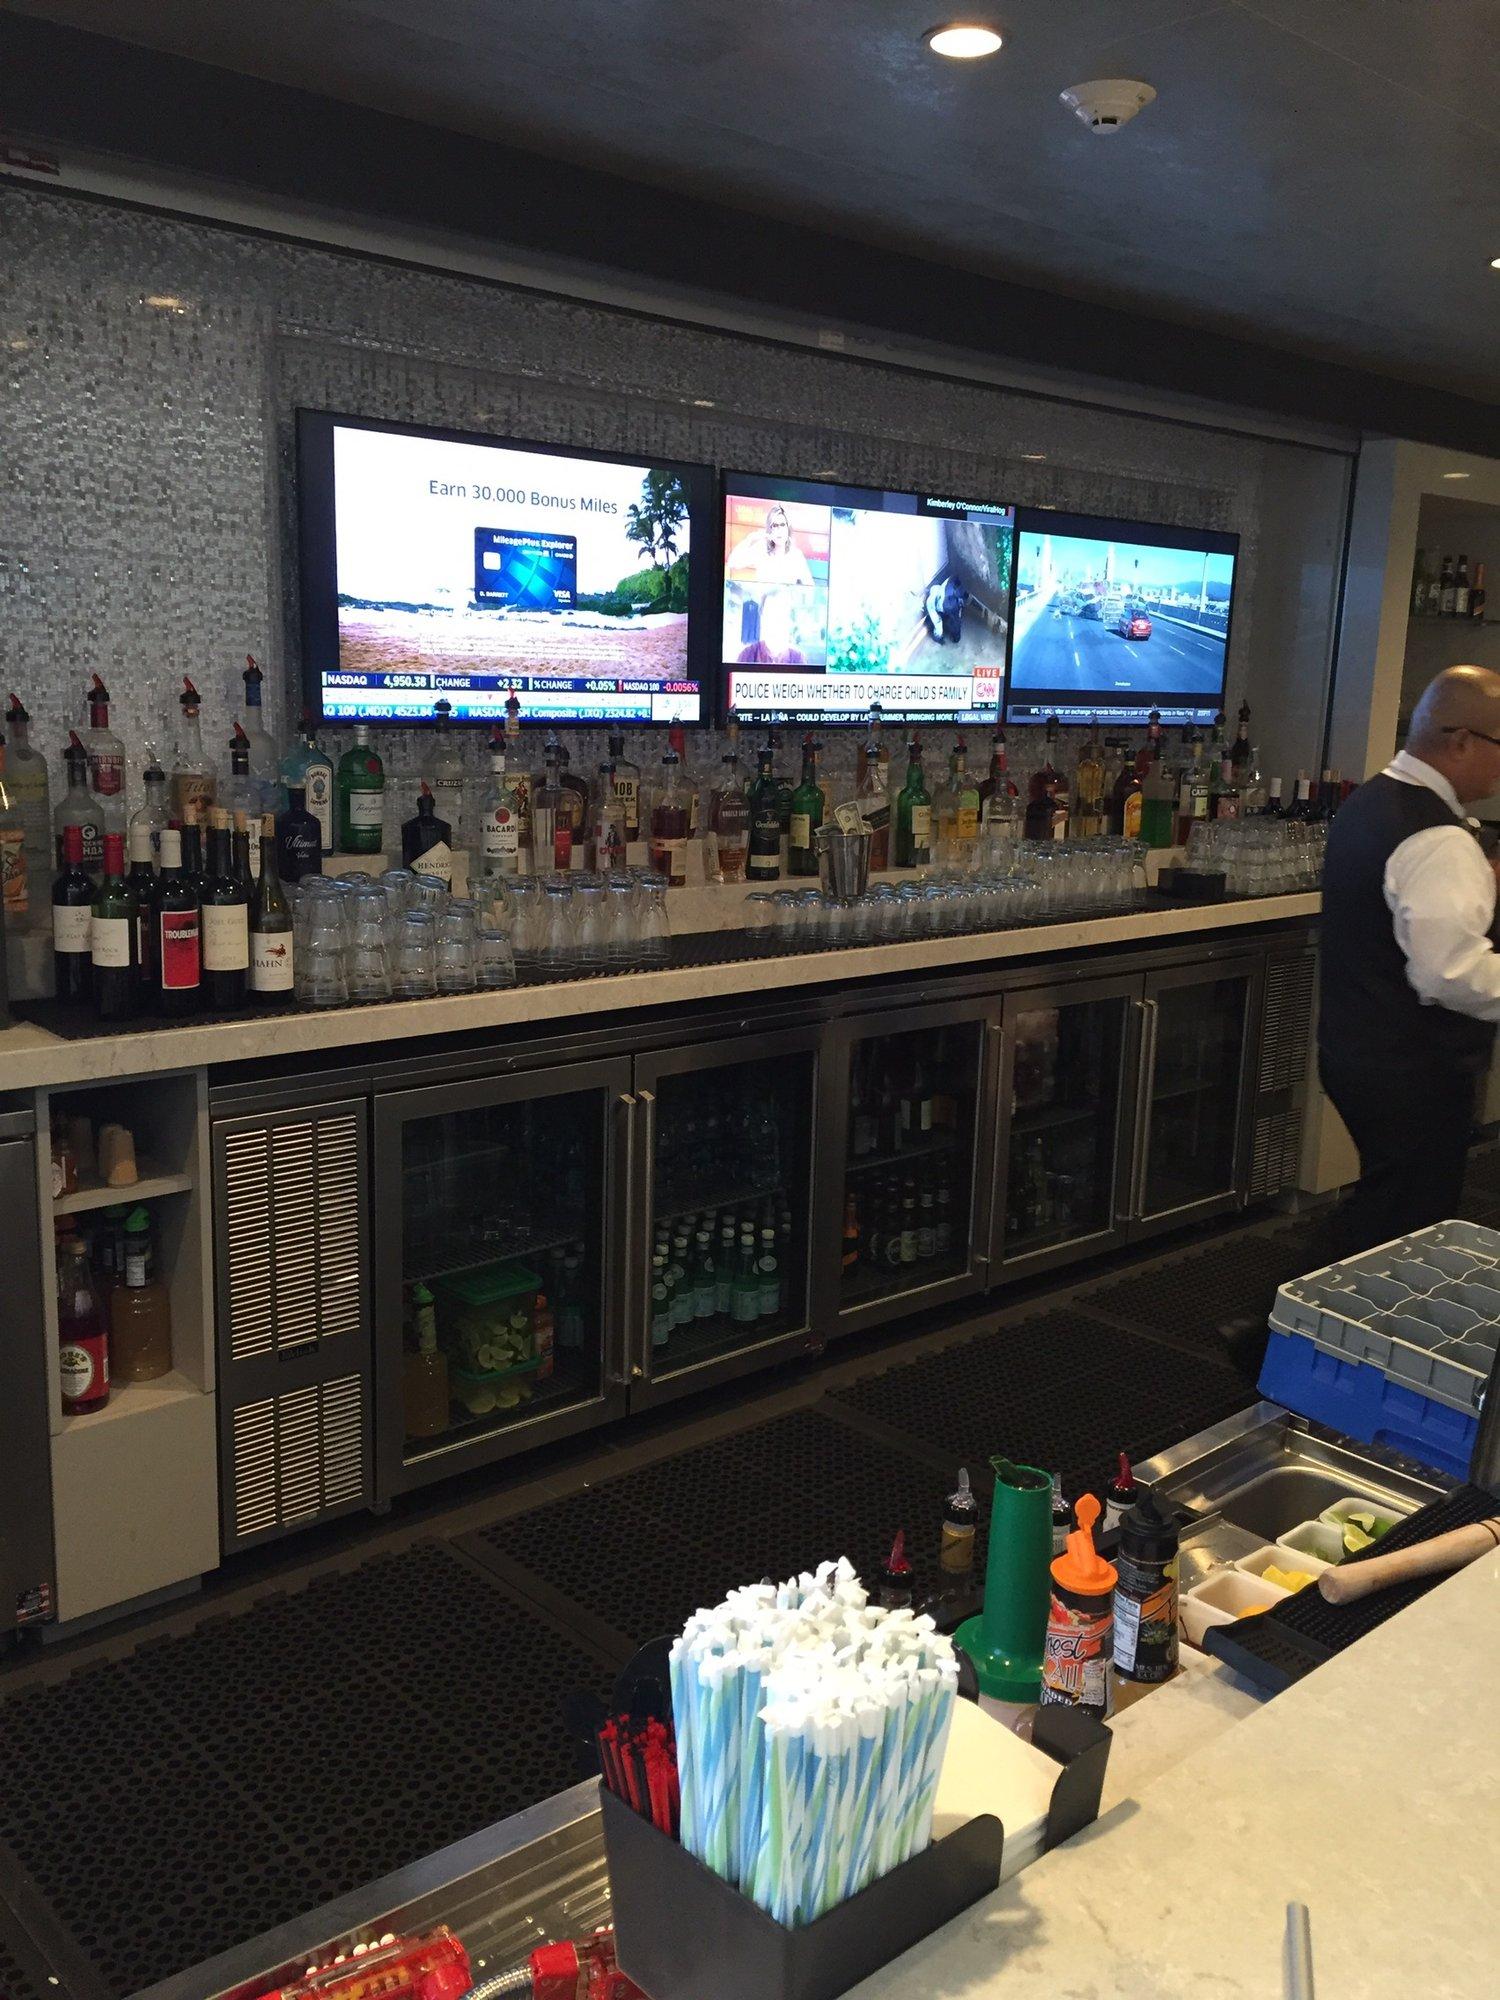 American Airlines Admirals Club (Gate D15) image 21 of 25